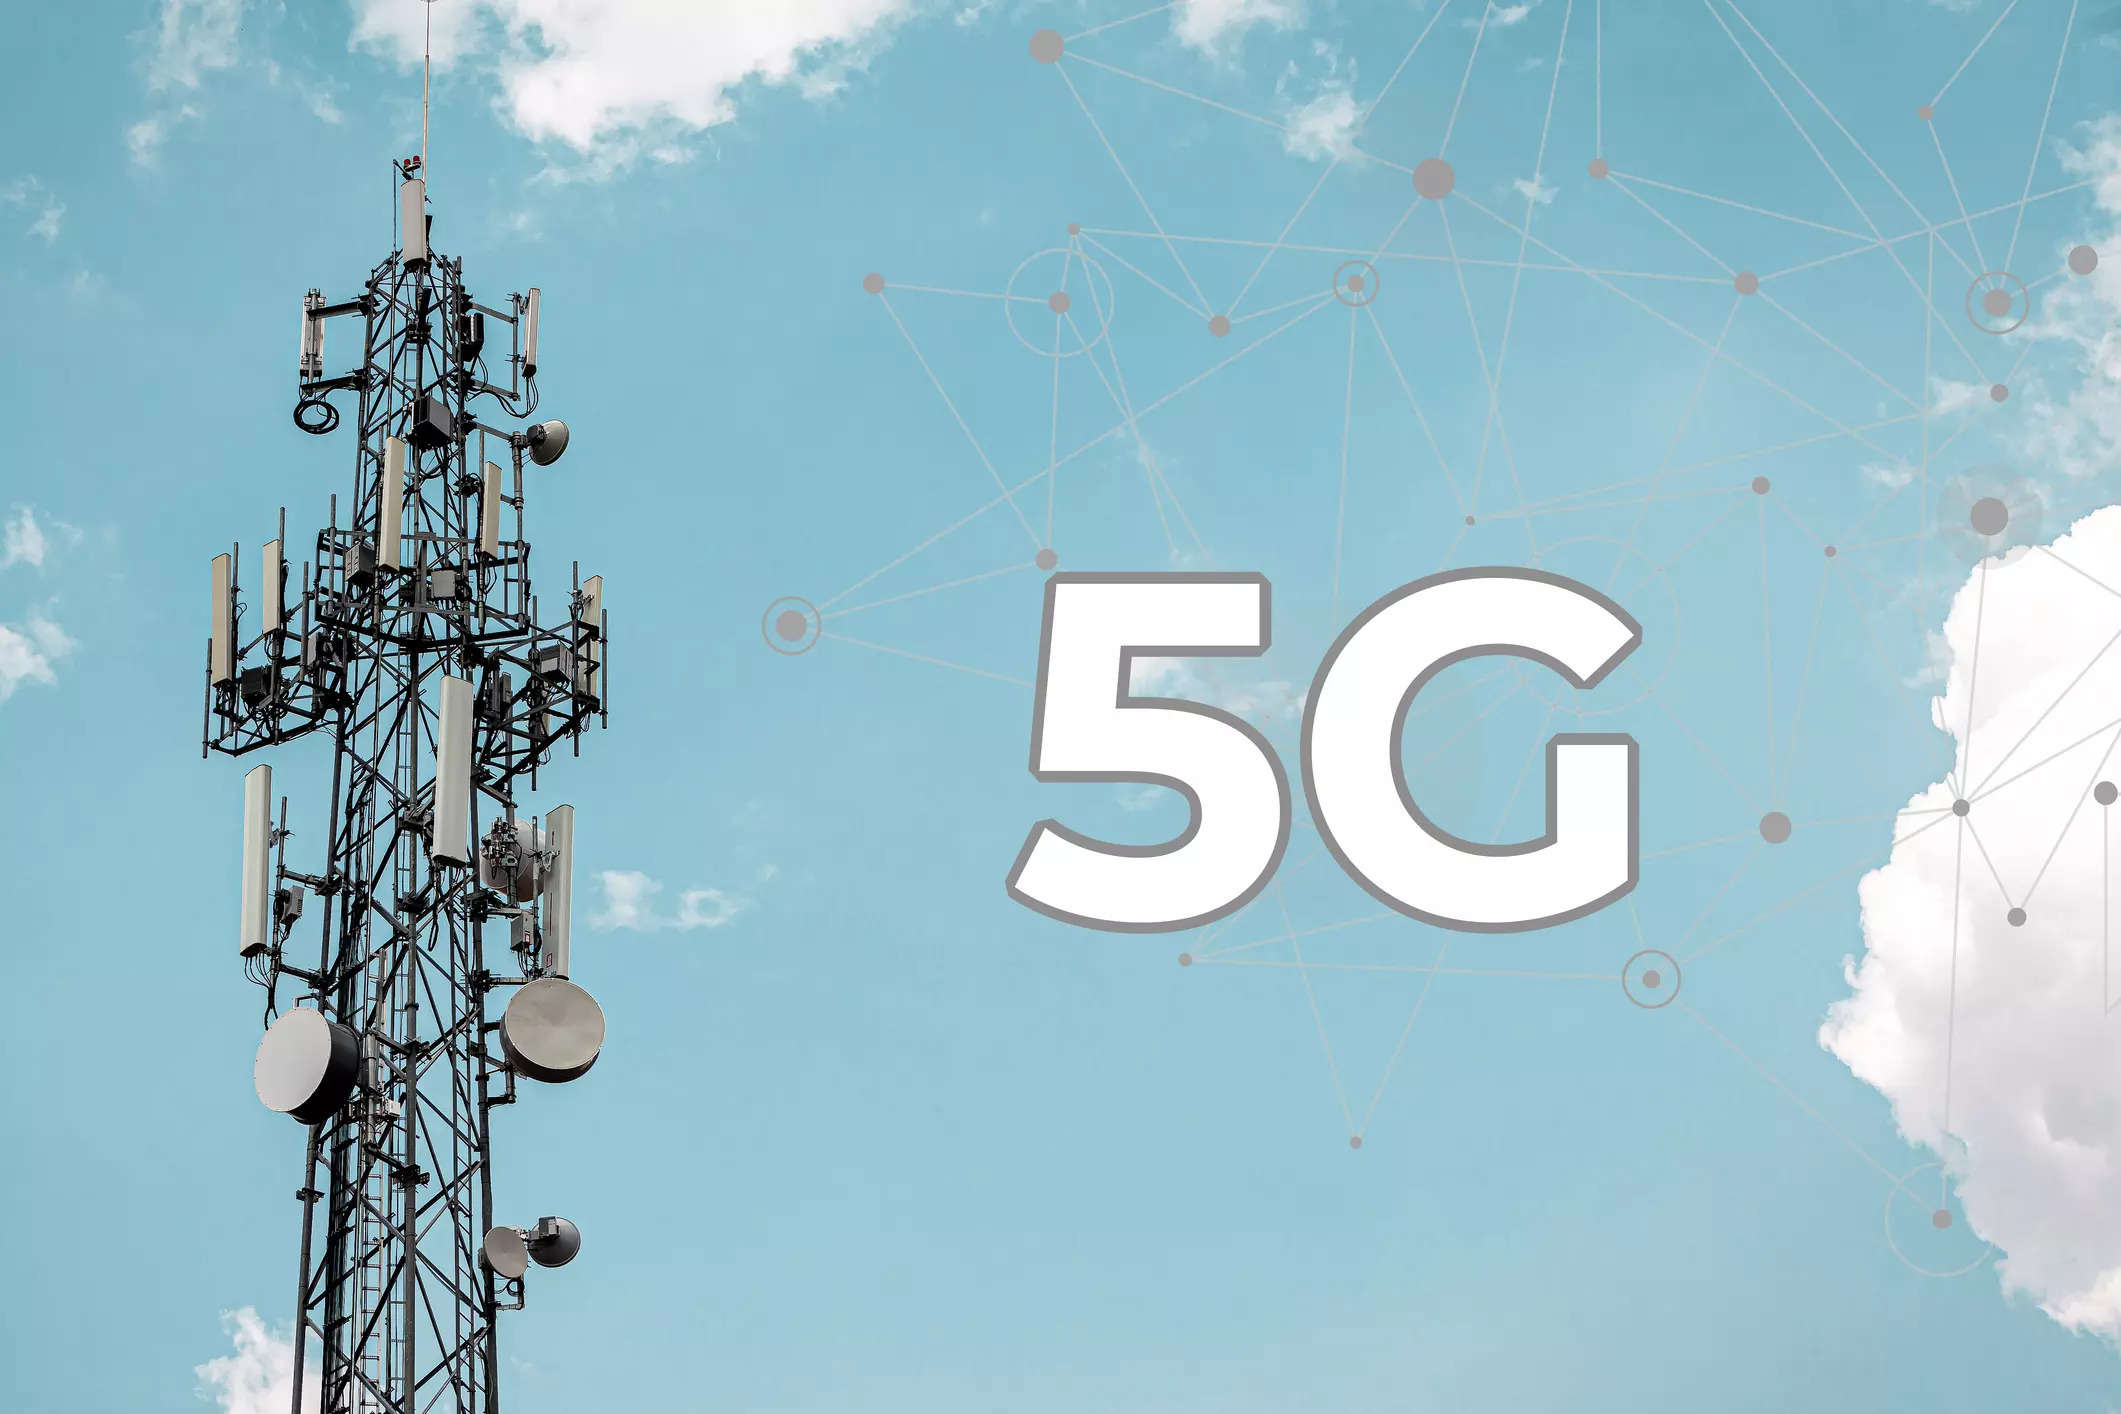 DoT's diktat to administratively allocate spectrum to facilitate backdoor entry of big tech companies for 5G: Jio, Airtel, Vi